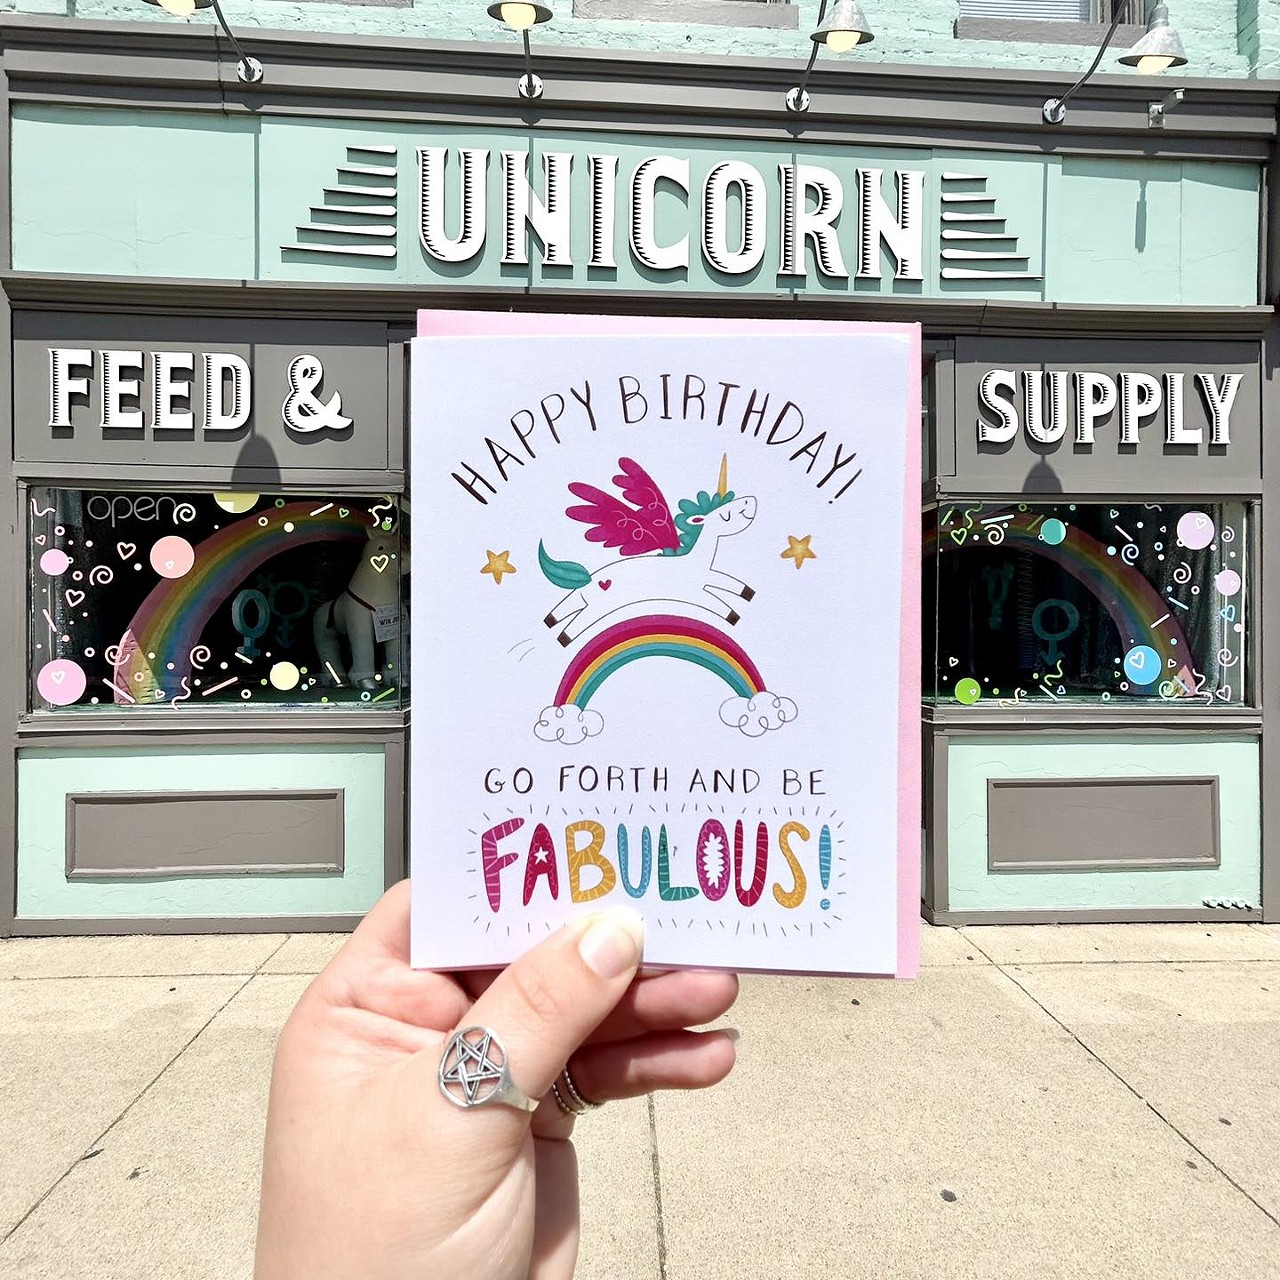 Unicorn Feed and Supply
114 W. Michigan Ave., Ypsilanti | unicornfeedsupply.com
Unicorn Feed and Supply is a magical “happy place” in downtown Ypsilanti. The queer-woman-owned gift shop carries items like rainbow stationery, mermaid earrings, animal plushies, stickers, and more.